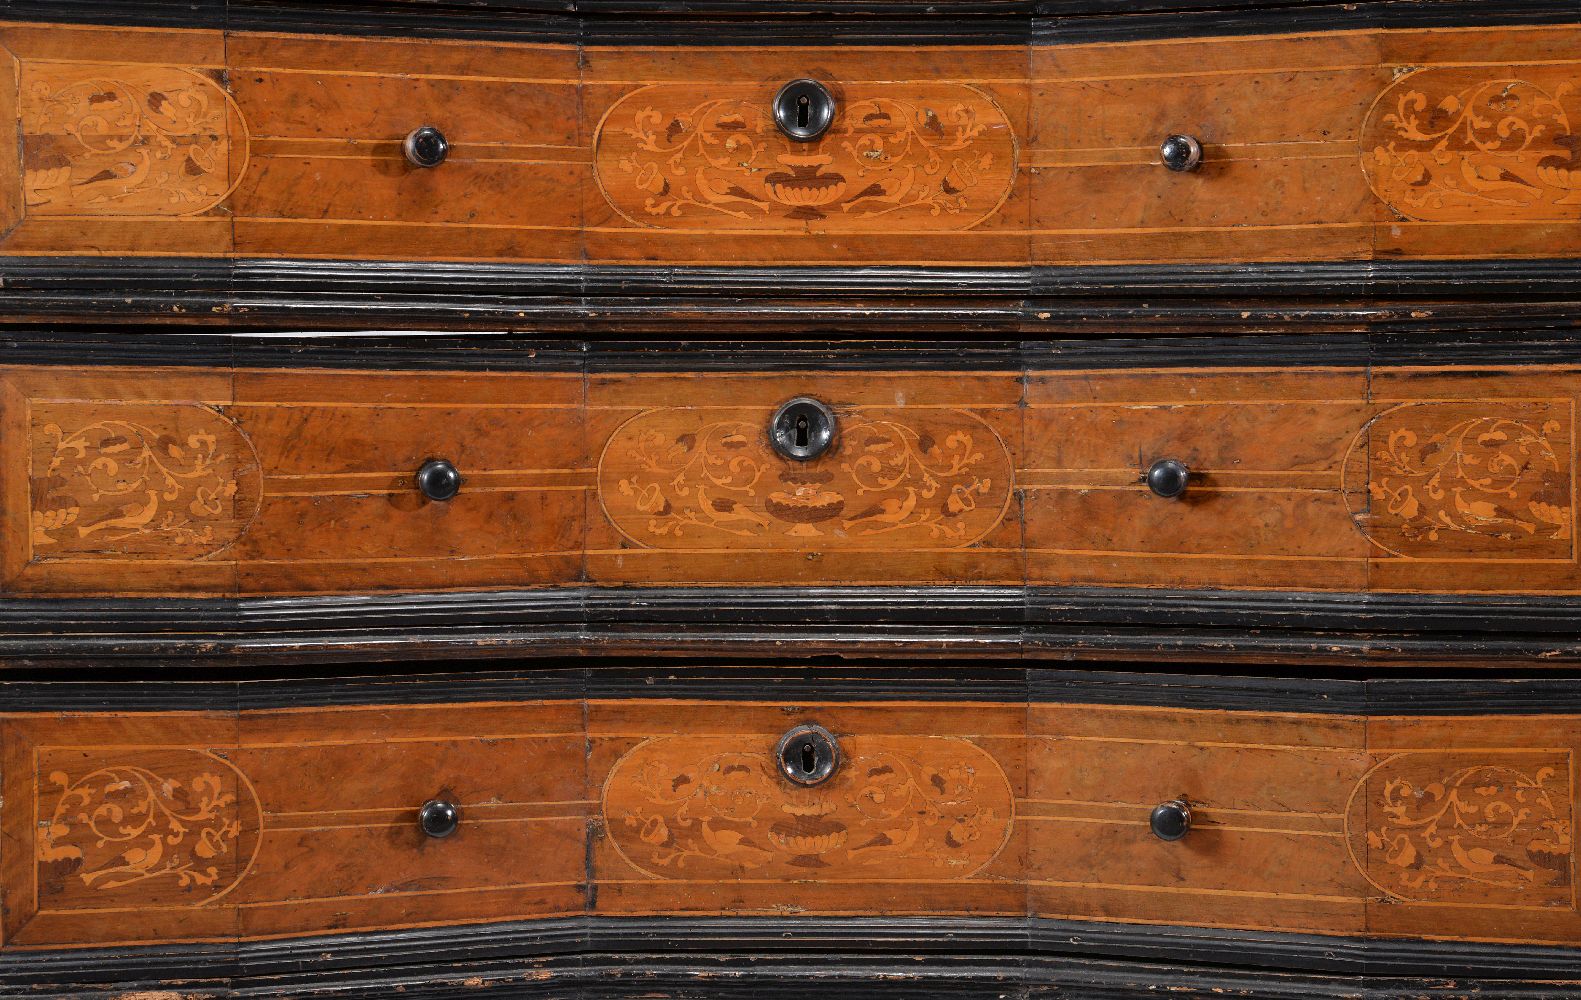 An Italian walnut and marquetry inlaid chest, c. 1700 - Image 2 of 3